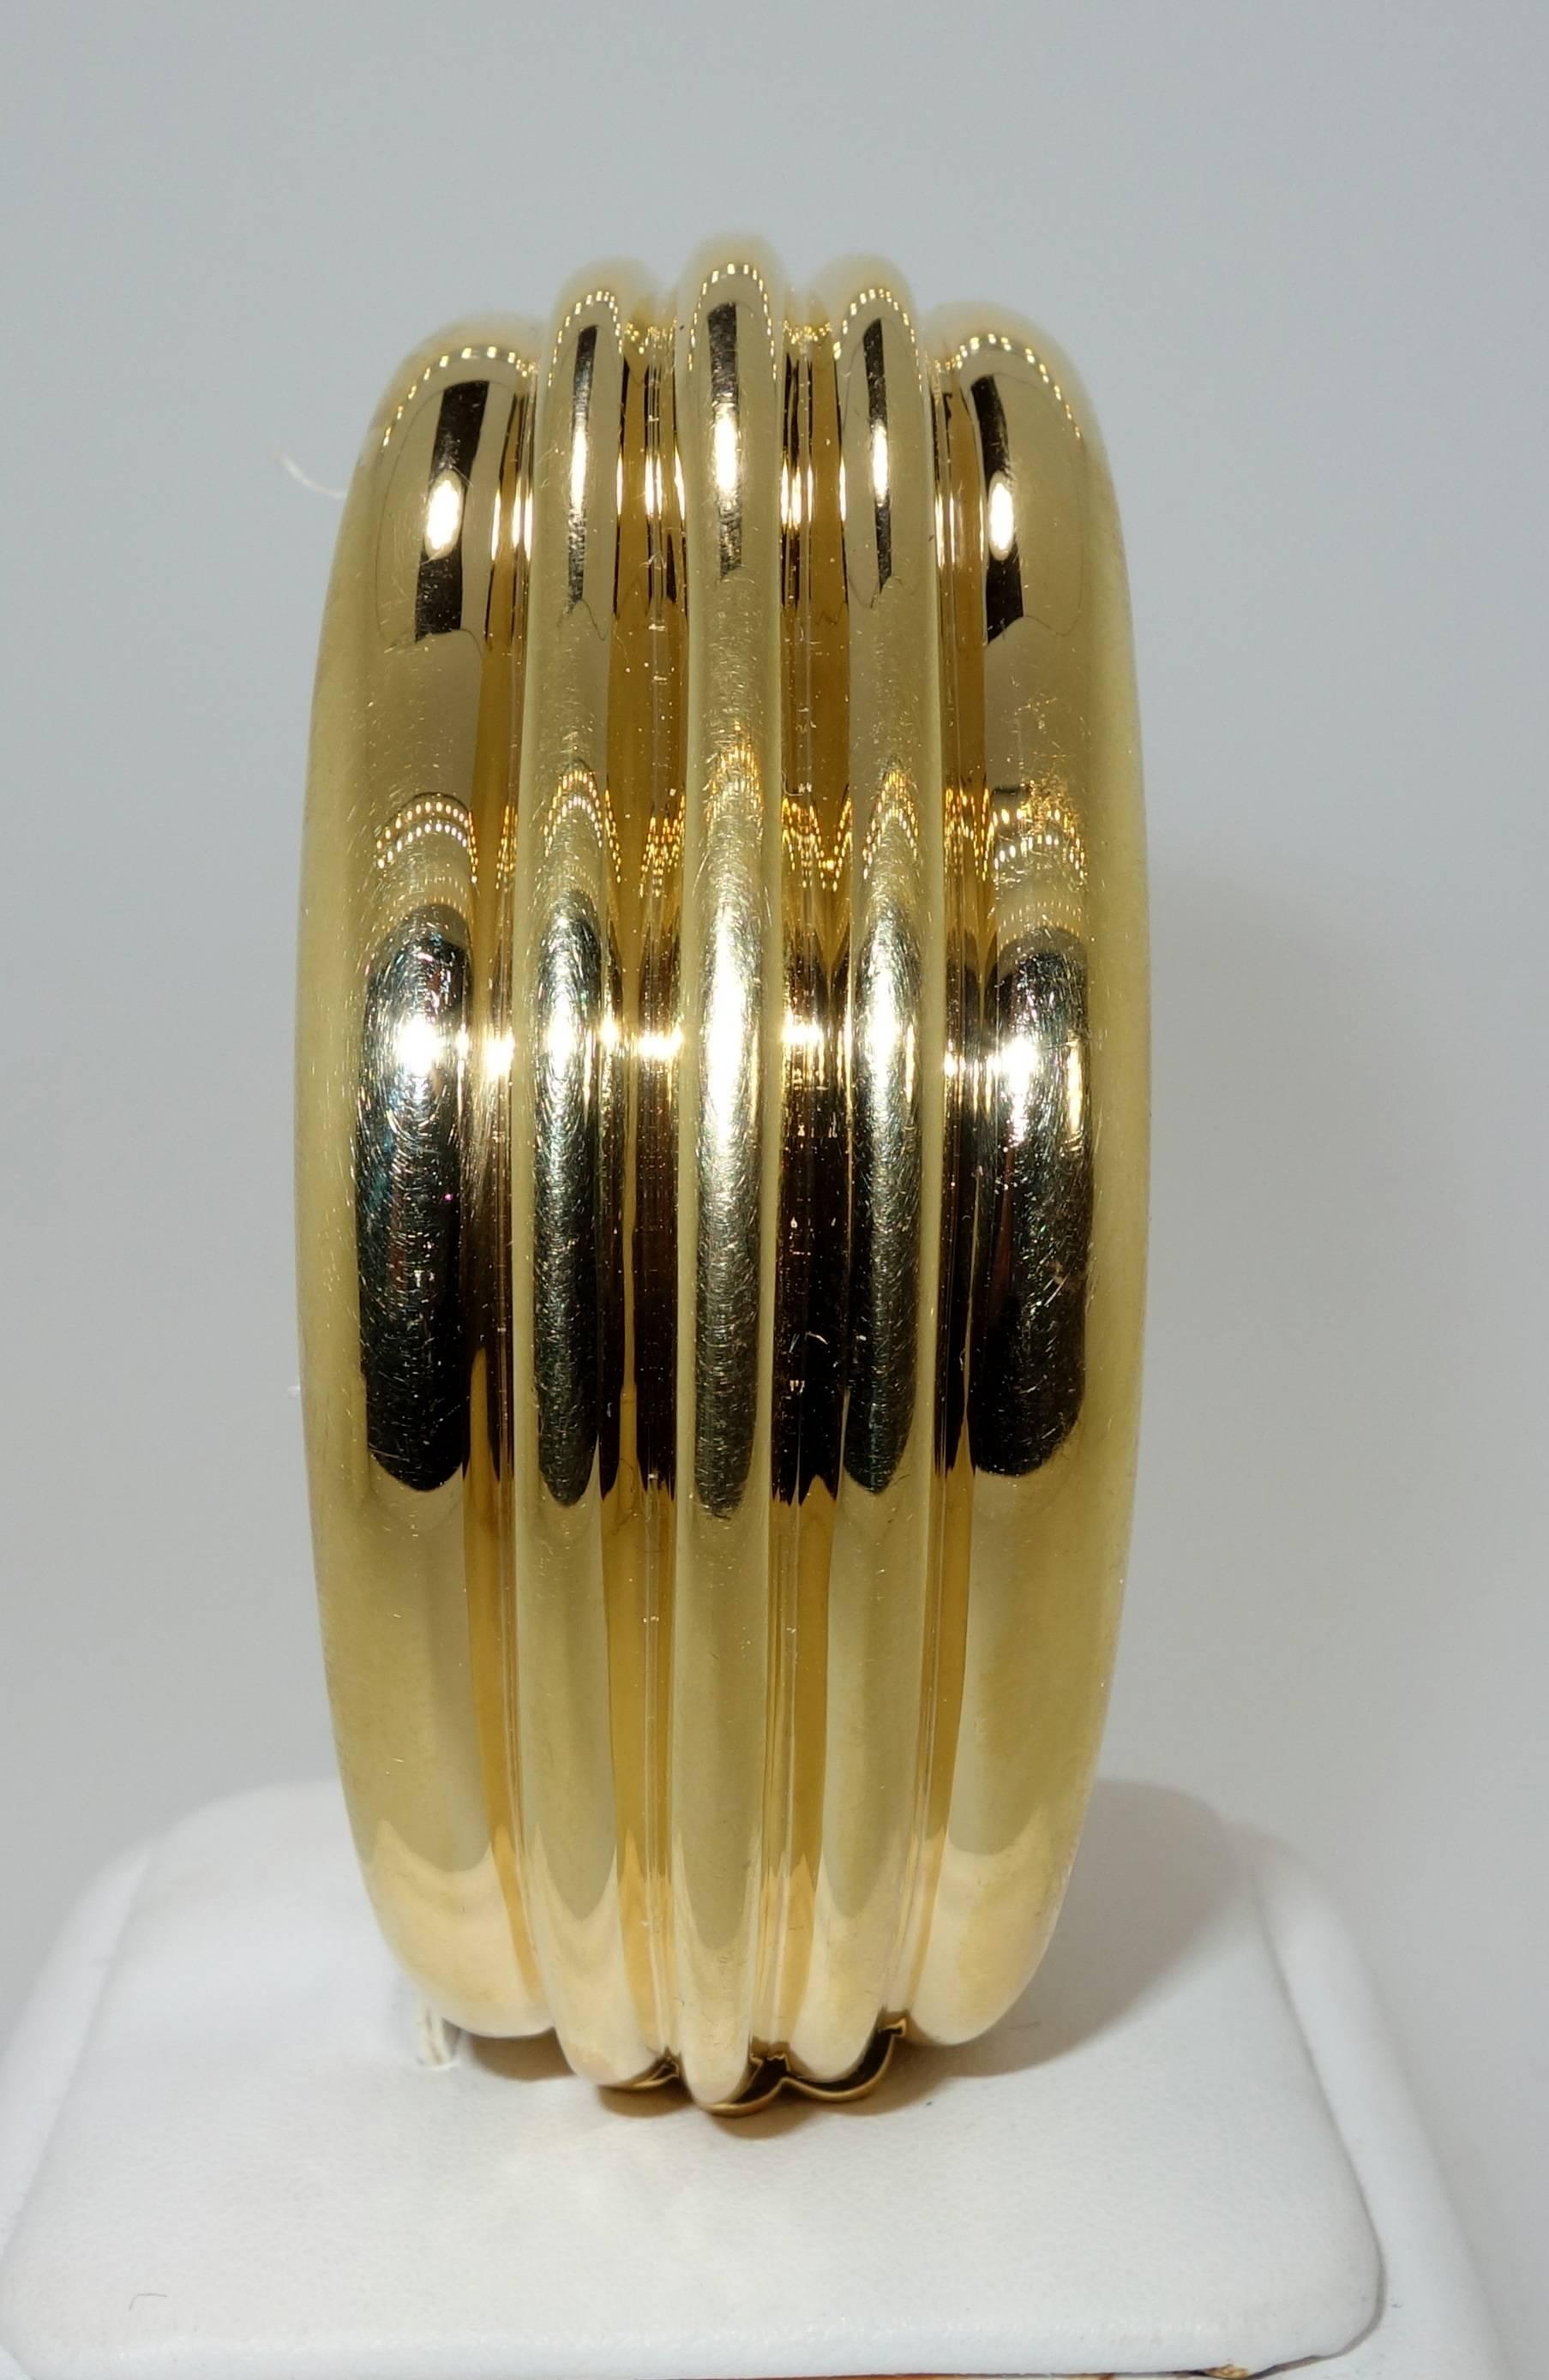 18K yellow gold bangle bracelet weighing over 126 grams.  Interior circumference is 6.75 inches.  This bold  and unusual statement for the wrist is sightly less than 1.25 inches wide.  Signed Cartier and numbered.  All of our pieces arrive in a fine